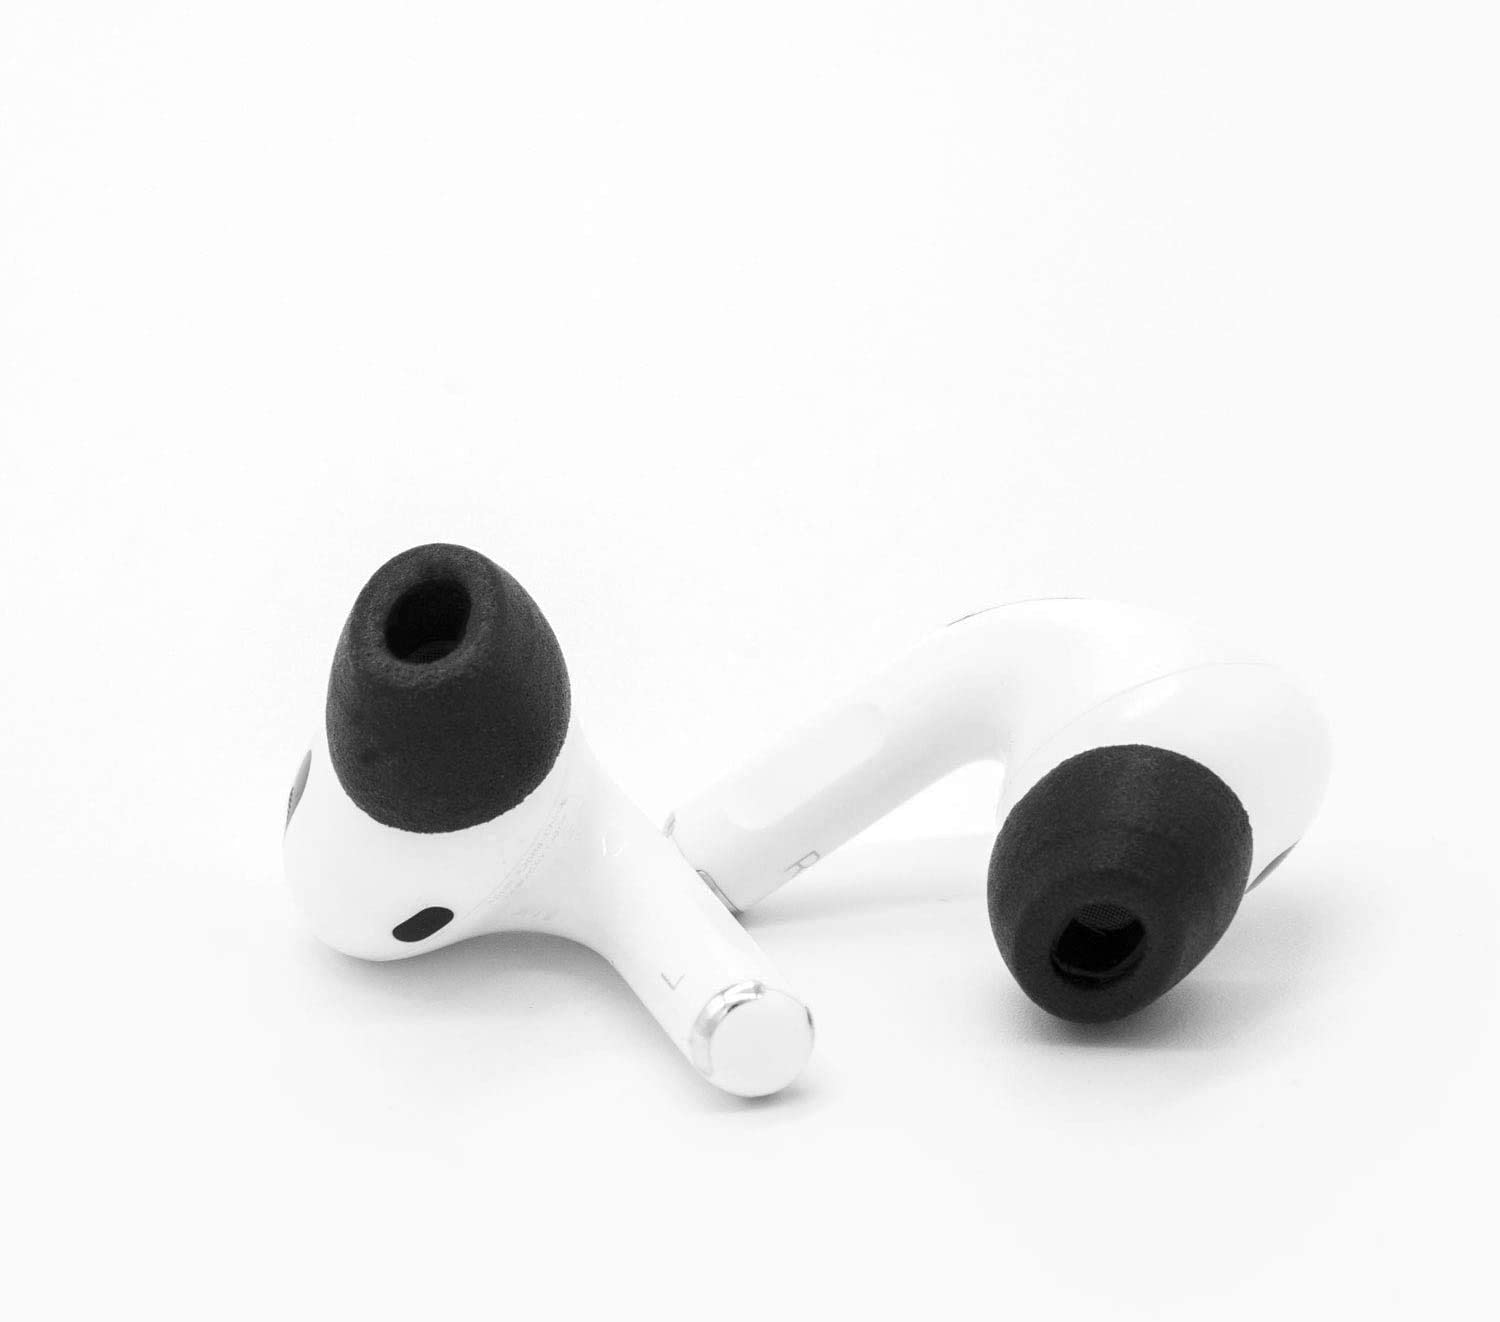 Comply Foam for AirPods Pro 2.0 Medium 3 Pair Pack